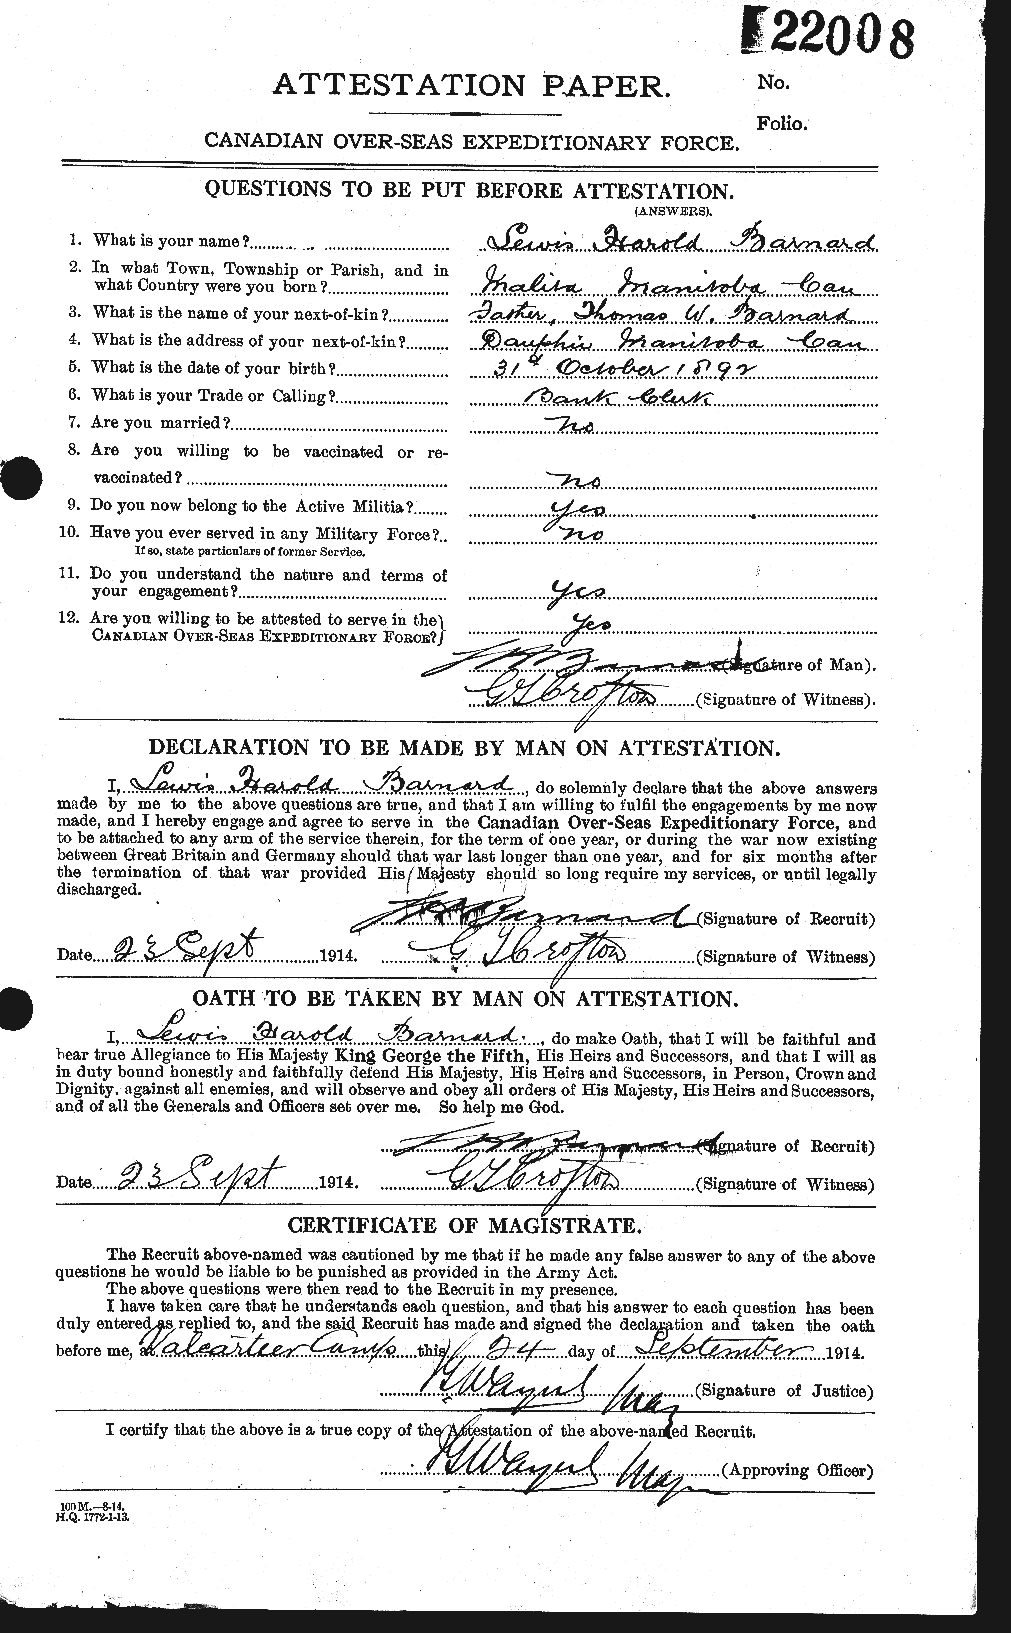 Personnel Records of the First World War - CEF 226033a